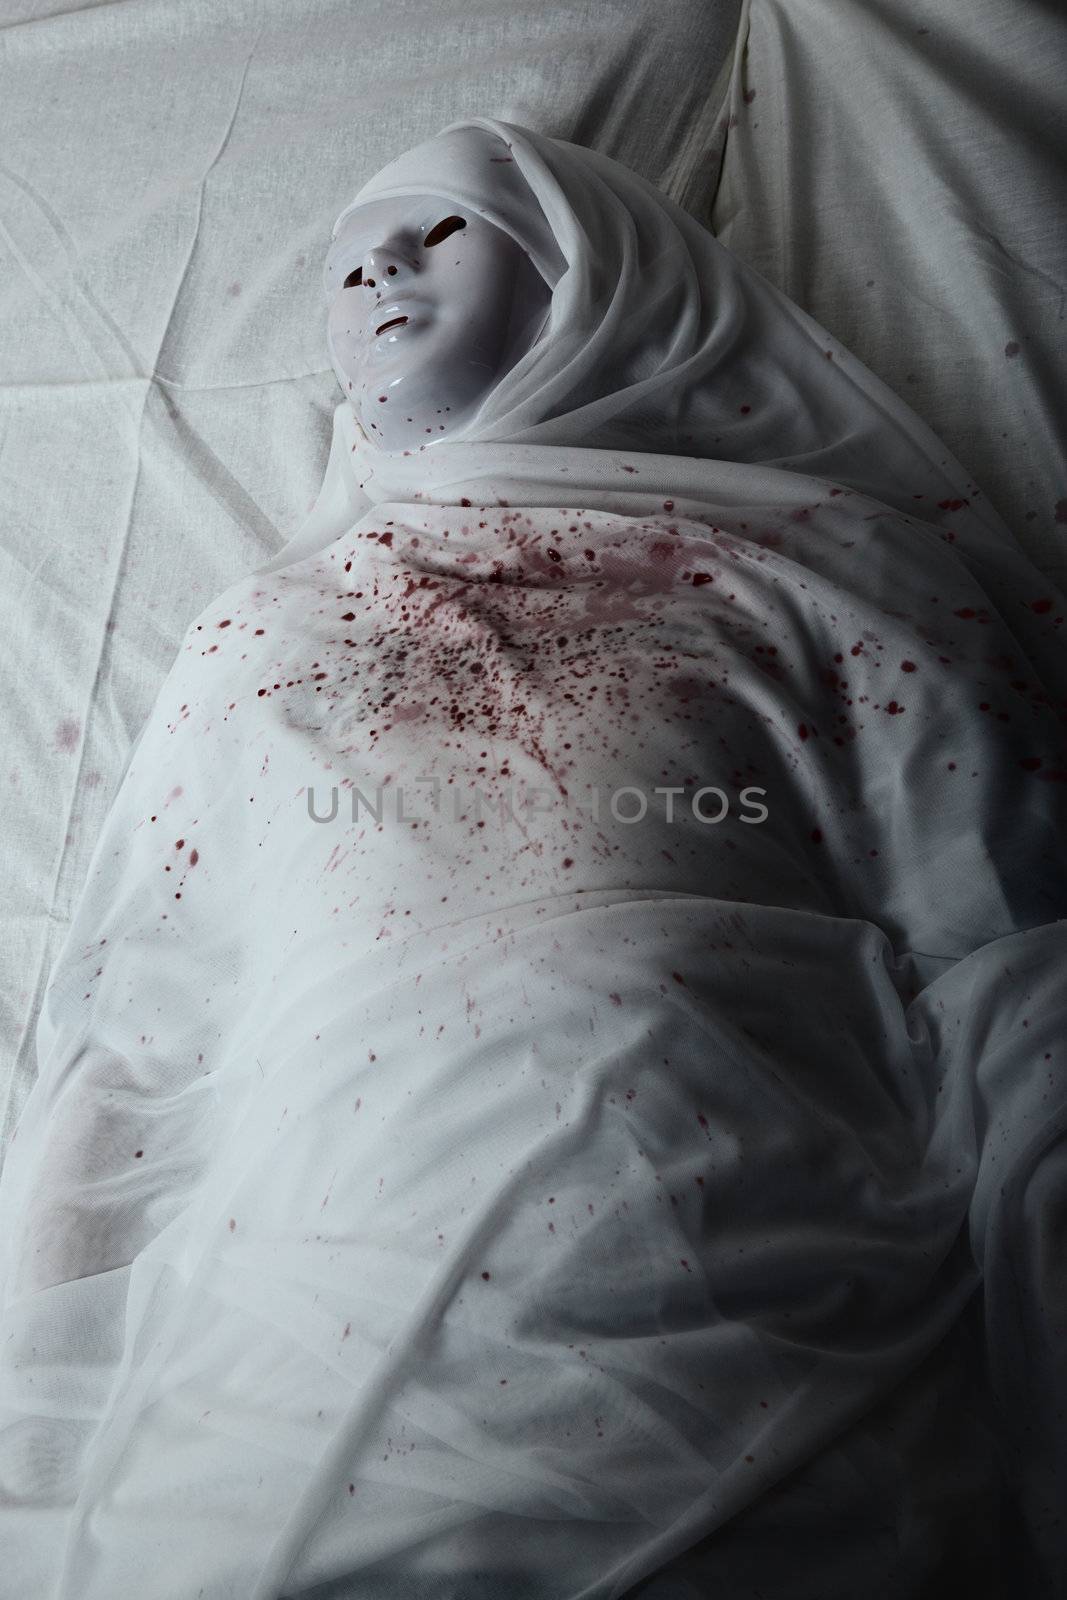 Mummy with mask and bloody spot. Artistic darkness and colors added